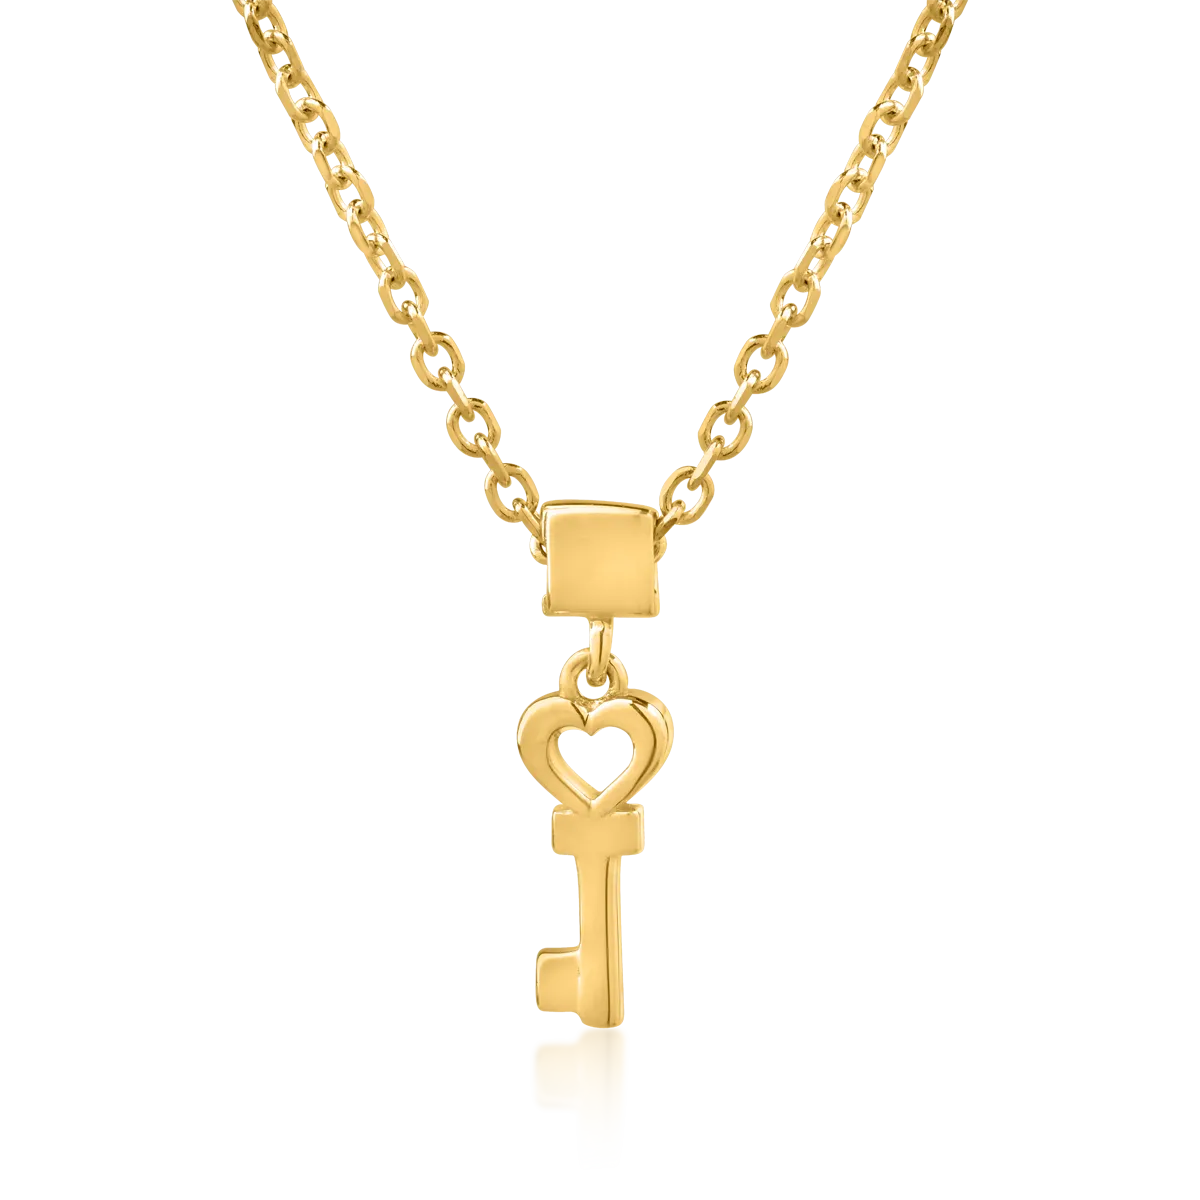 14K yellow gold pendant necklace